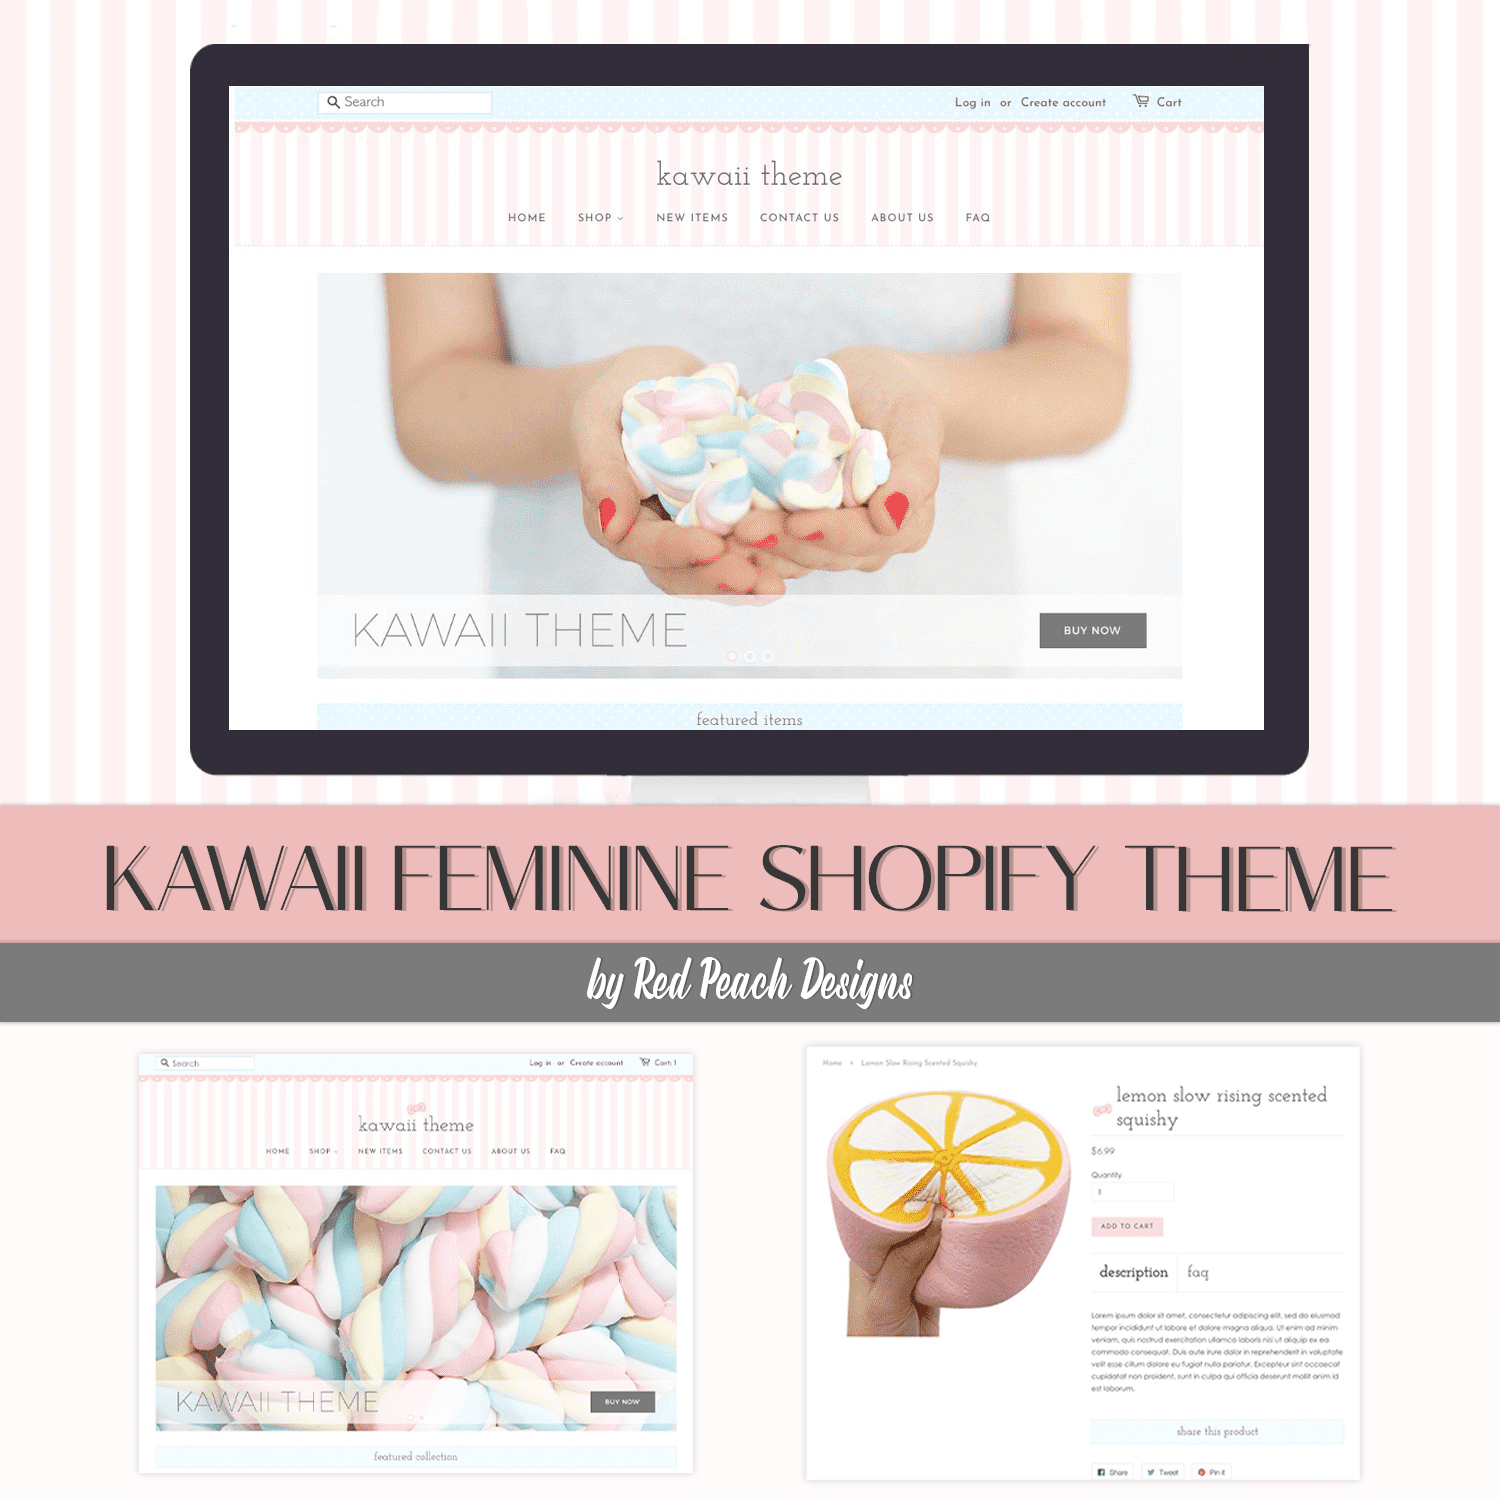 Preview Kawaii Feminine Shopify Theme on the tablet.